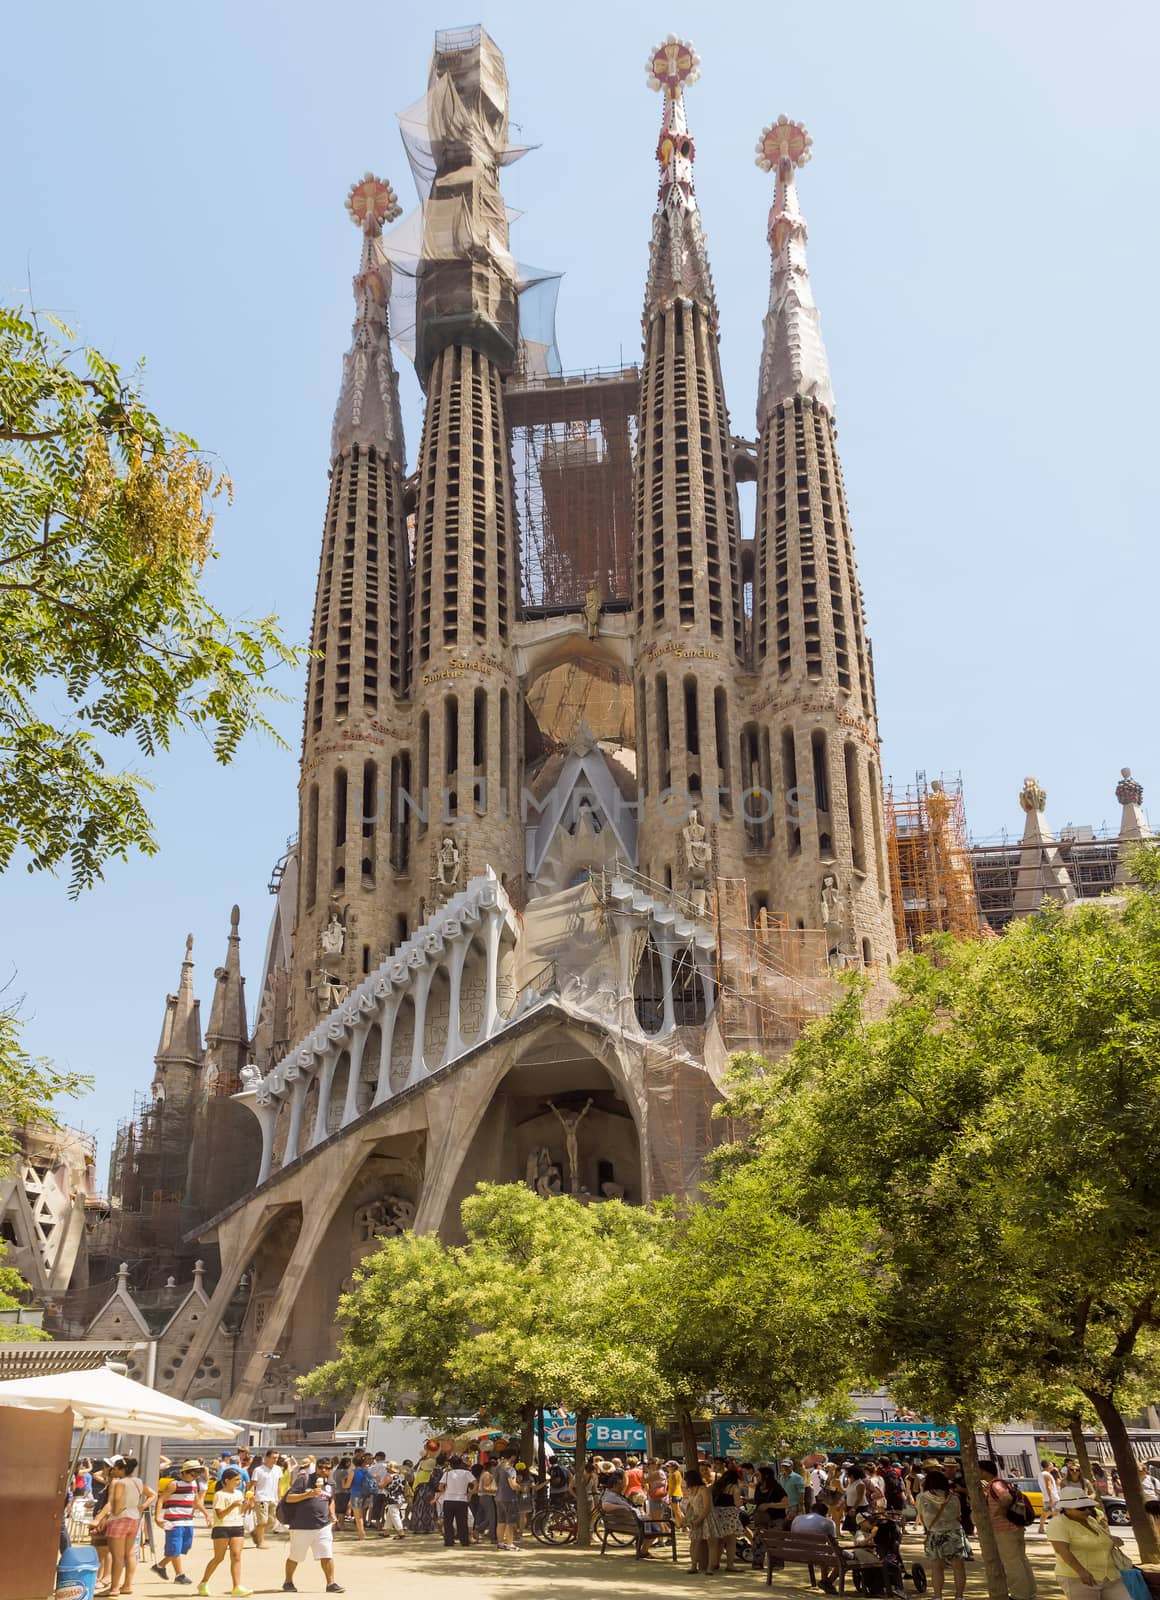 BARCELONA, SPAIN - JULY 6, 2015: La Sagrada Familia - the impressive cathedral designed by Gaudi, which is being build since 19 March 1882 and is not finished yet.

Barcelona, Spain - July 6, 2015: La Sagrada Familia - the impressive cathedral designed by Gaudi, which is being build since 19 March 1882 and is not finished yet. People are walking by street.